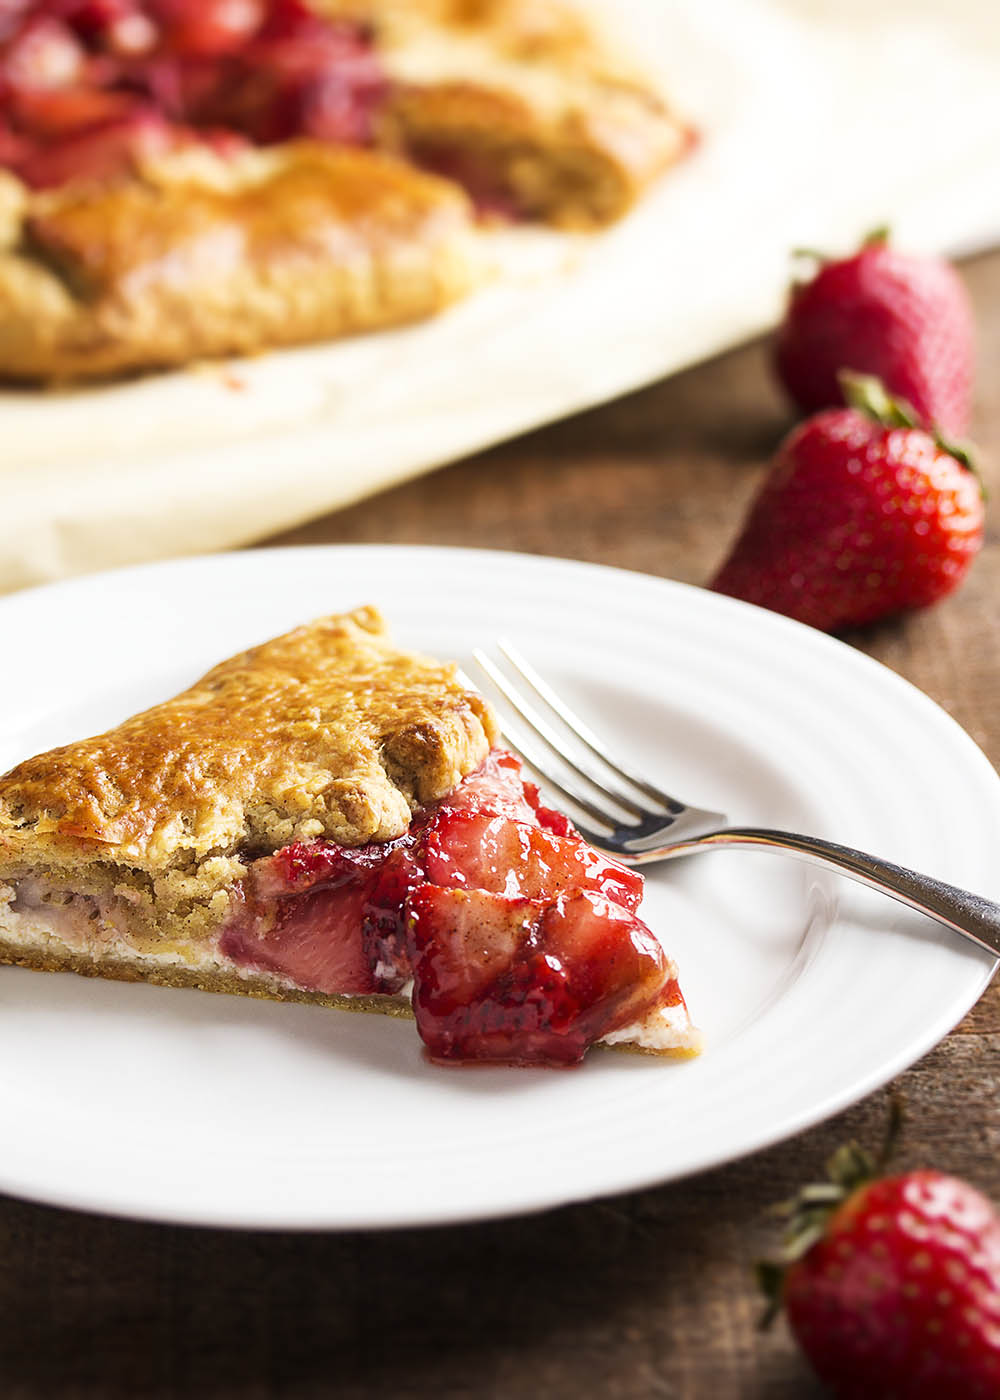 Strawberry Ricotta Crostata - This naturally sweetened crostata is a fun and relaxed take on pie, full of fresh strawberries, creamy ricotta, and brushed with honey. | justalittlebitofbacon.com